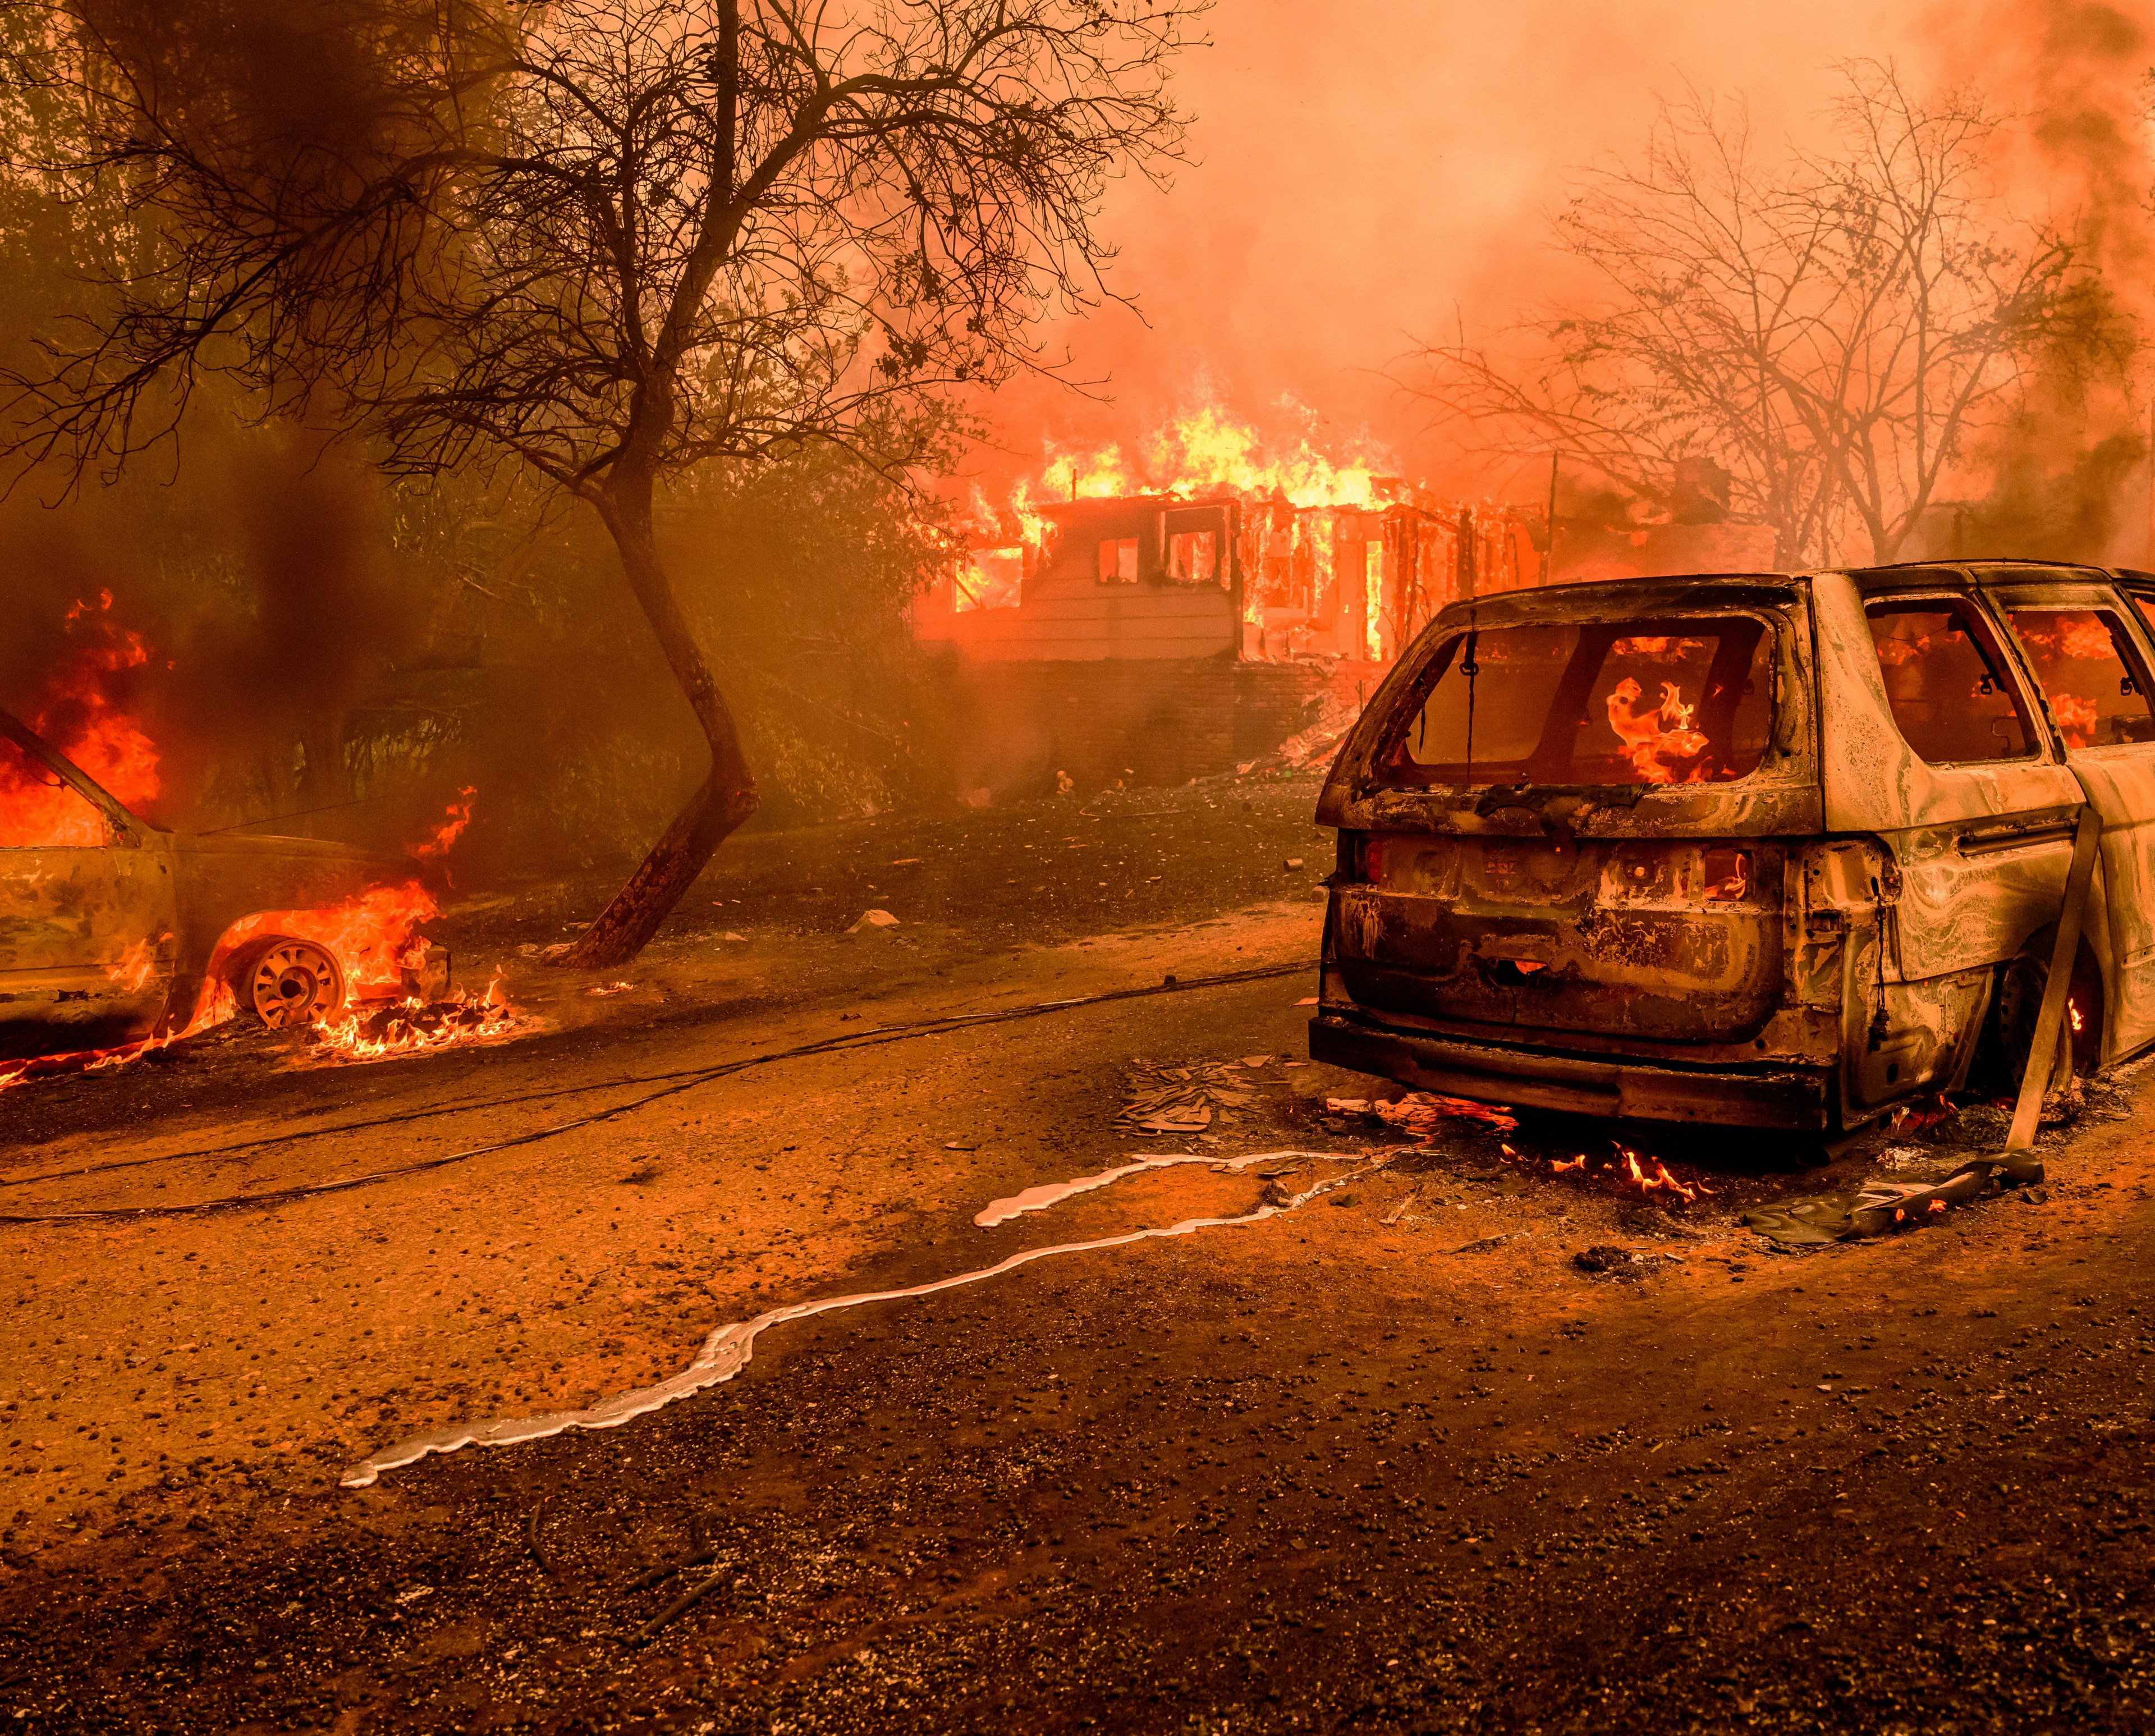 The image shows a devastated scene with two burning cars on a road, a house engulfed in flames, and charred trees under an orange sky filled with thick smoke.